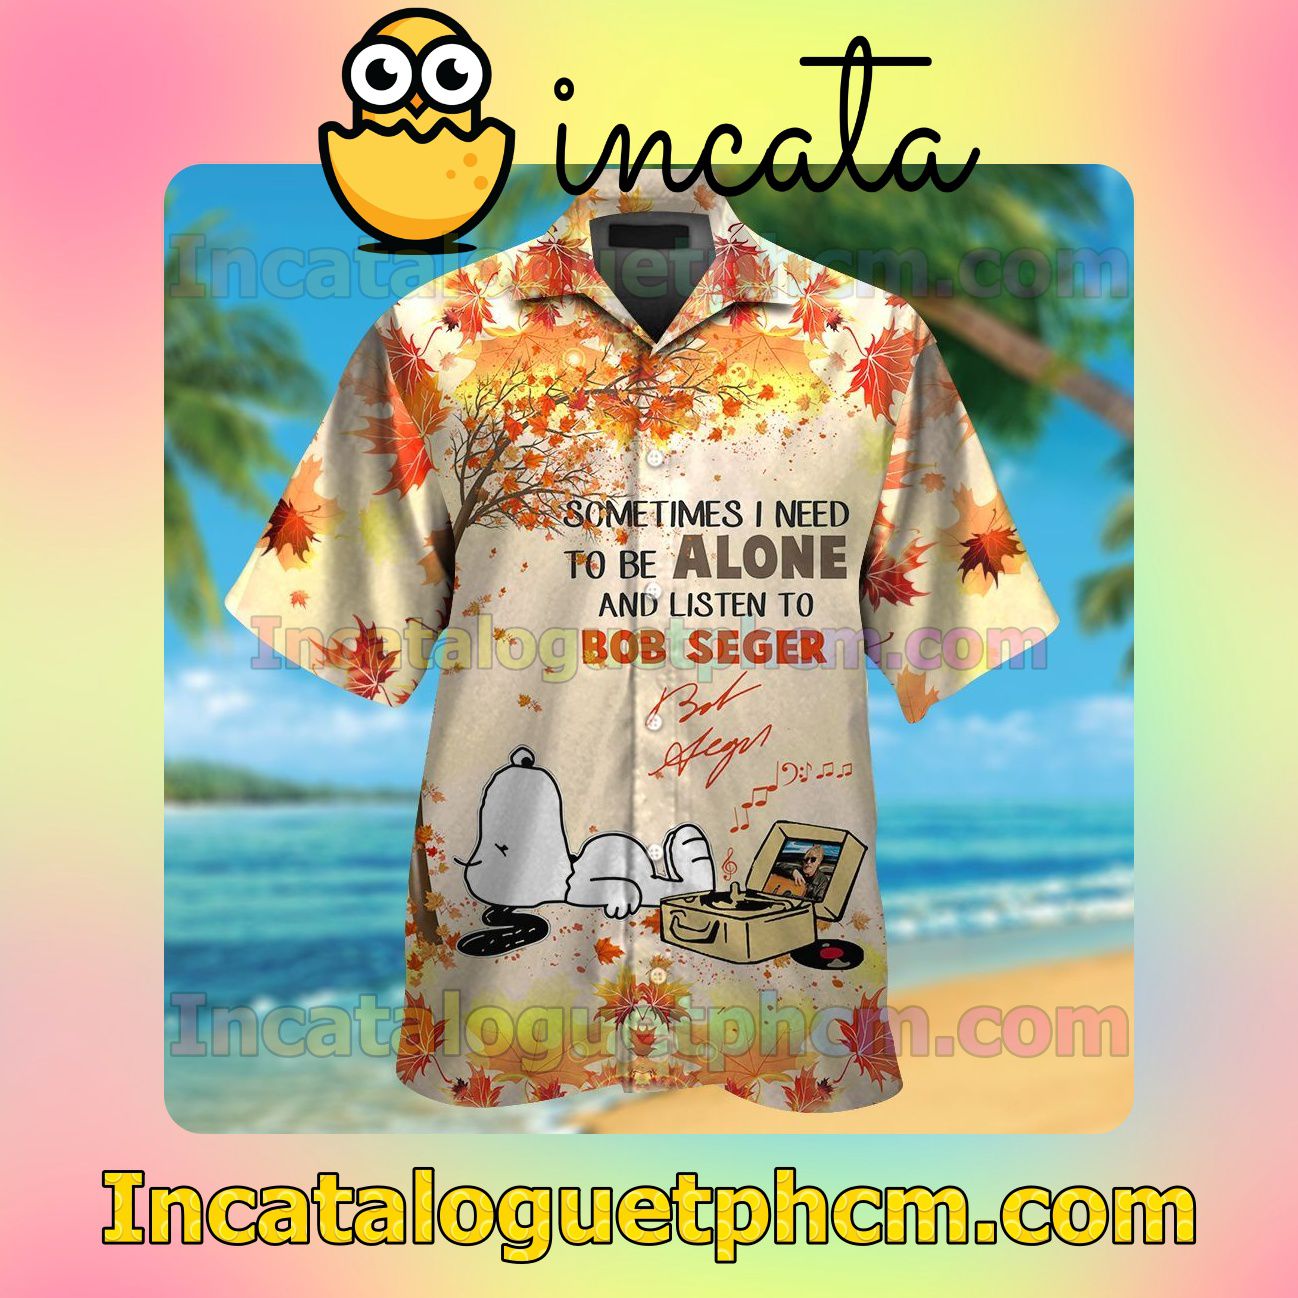 To Be Alone And Listen To Bob Seger Beach Vacation Shirt, Swim Shorts